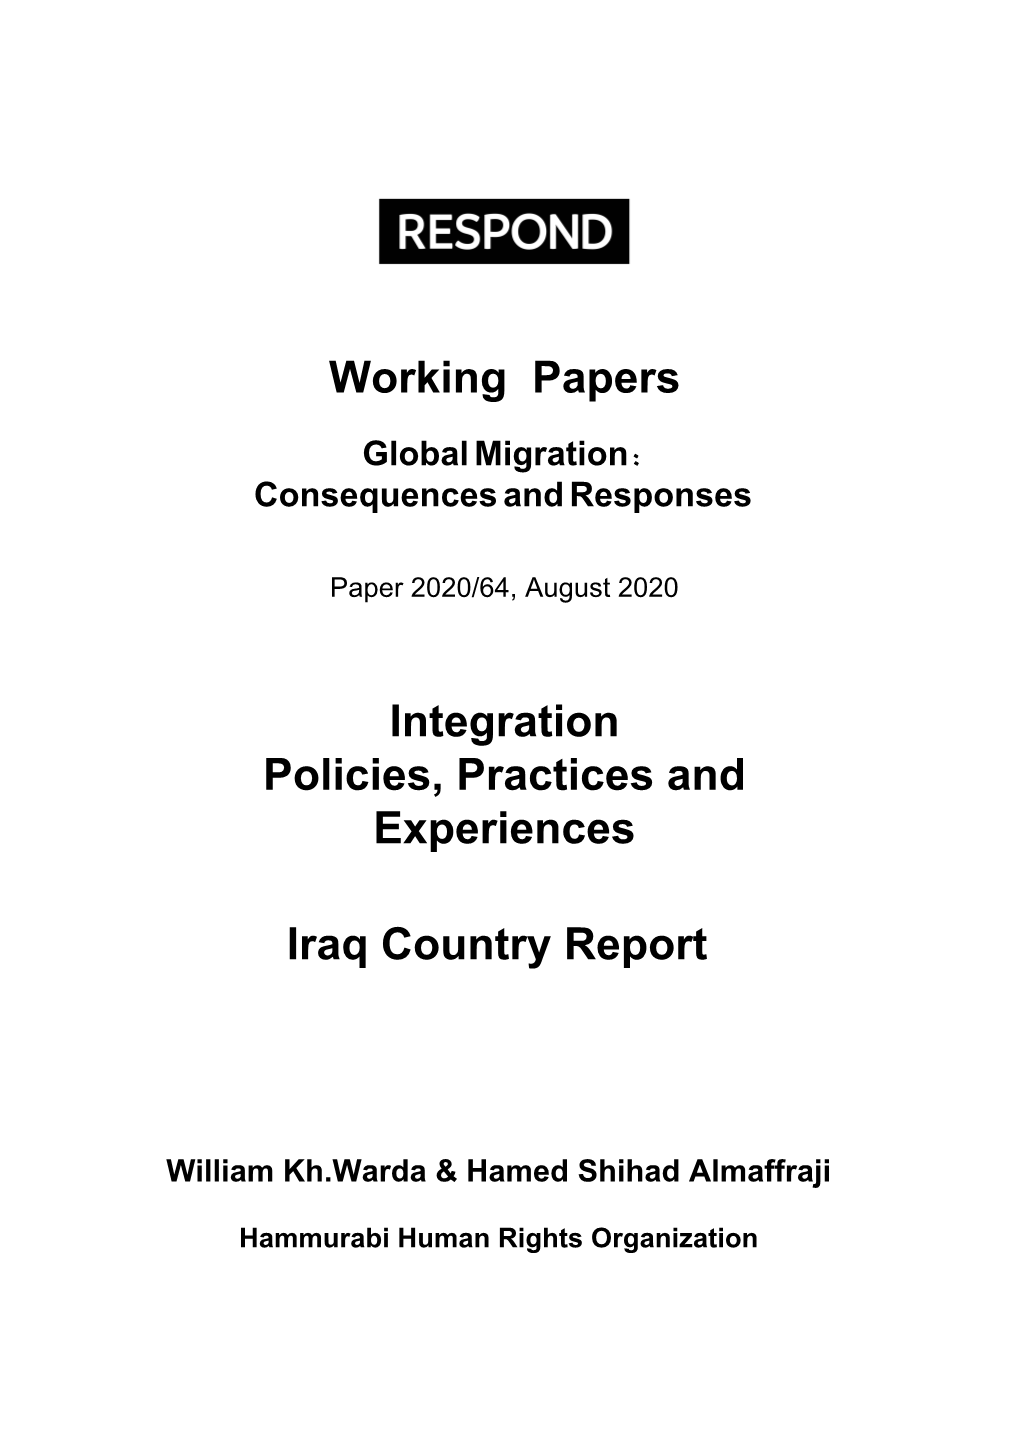 Working Papers Integration Policies, Practices and Experiences Iraq